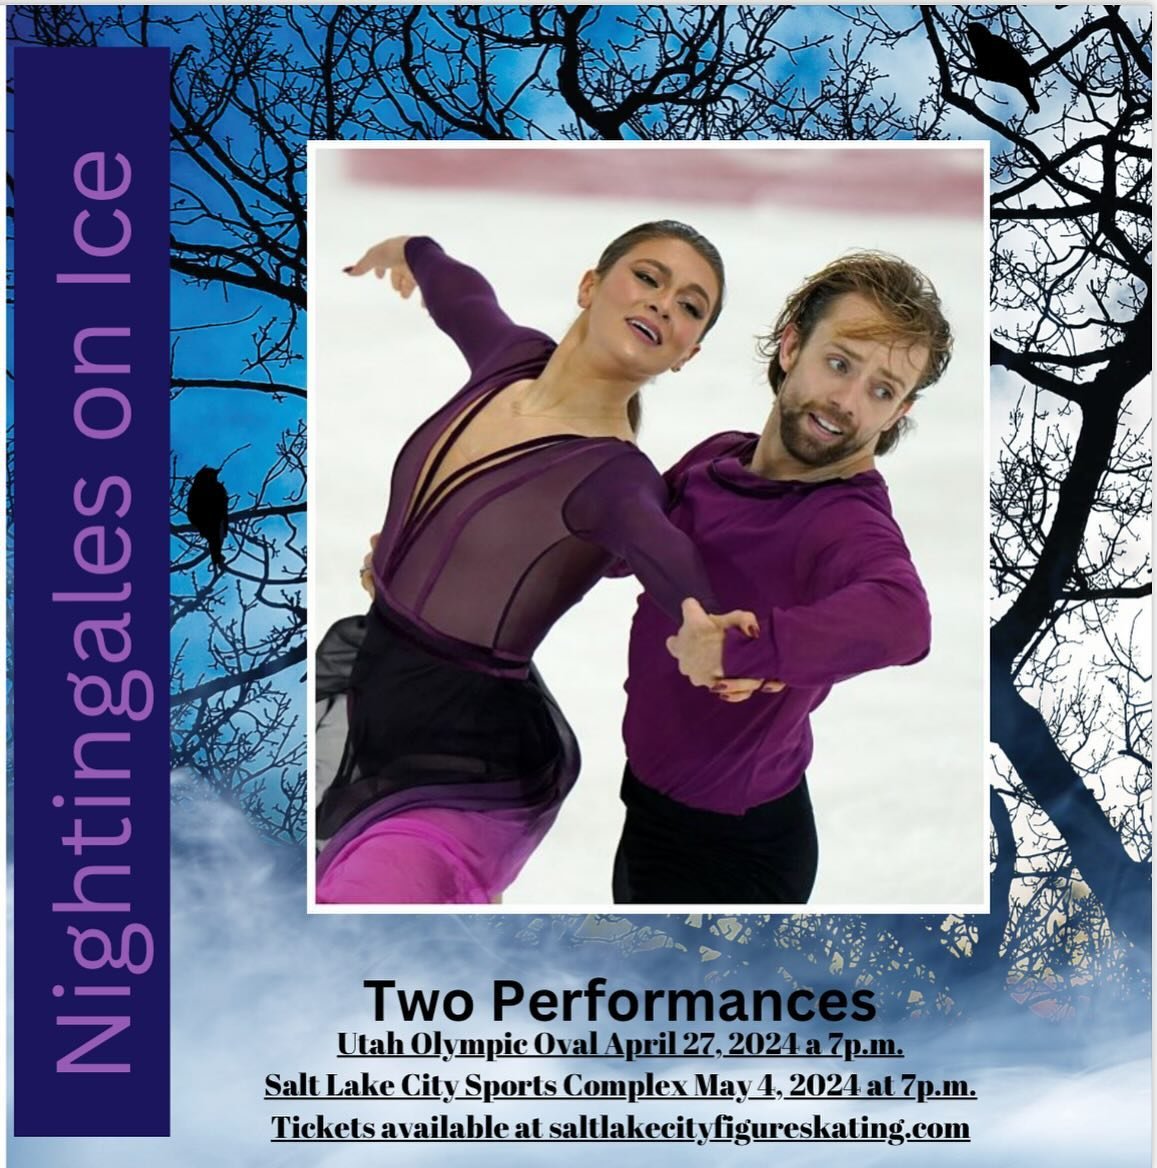 Exciting News! World &amp; Olympic ice dancers Kaitlyn Hawayek and Jean-Luc Baker will skate alongside local talent in Utah! Join us at Nightingales on Ice for their stunning performances. Tickets just $15. Nightingales on Ice Tickets, April 27th and